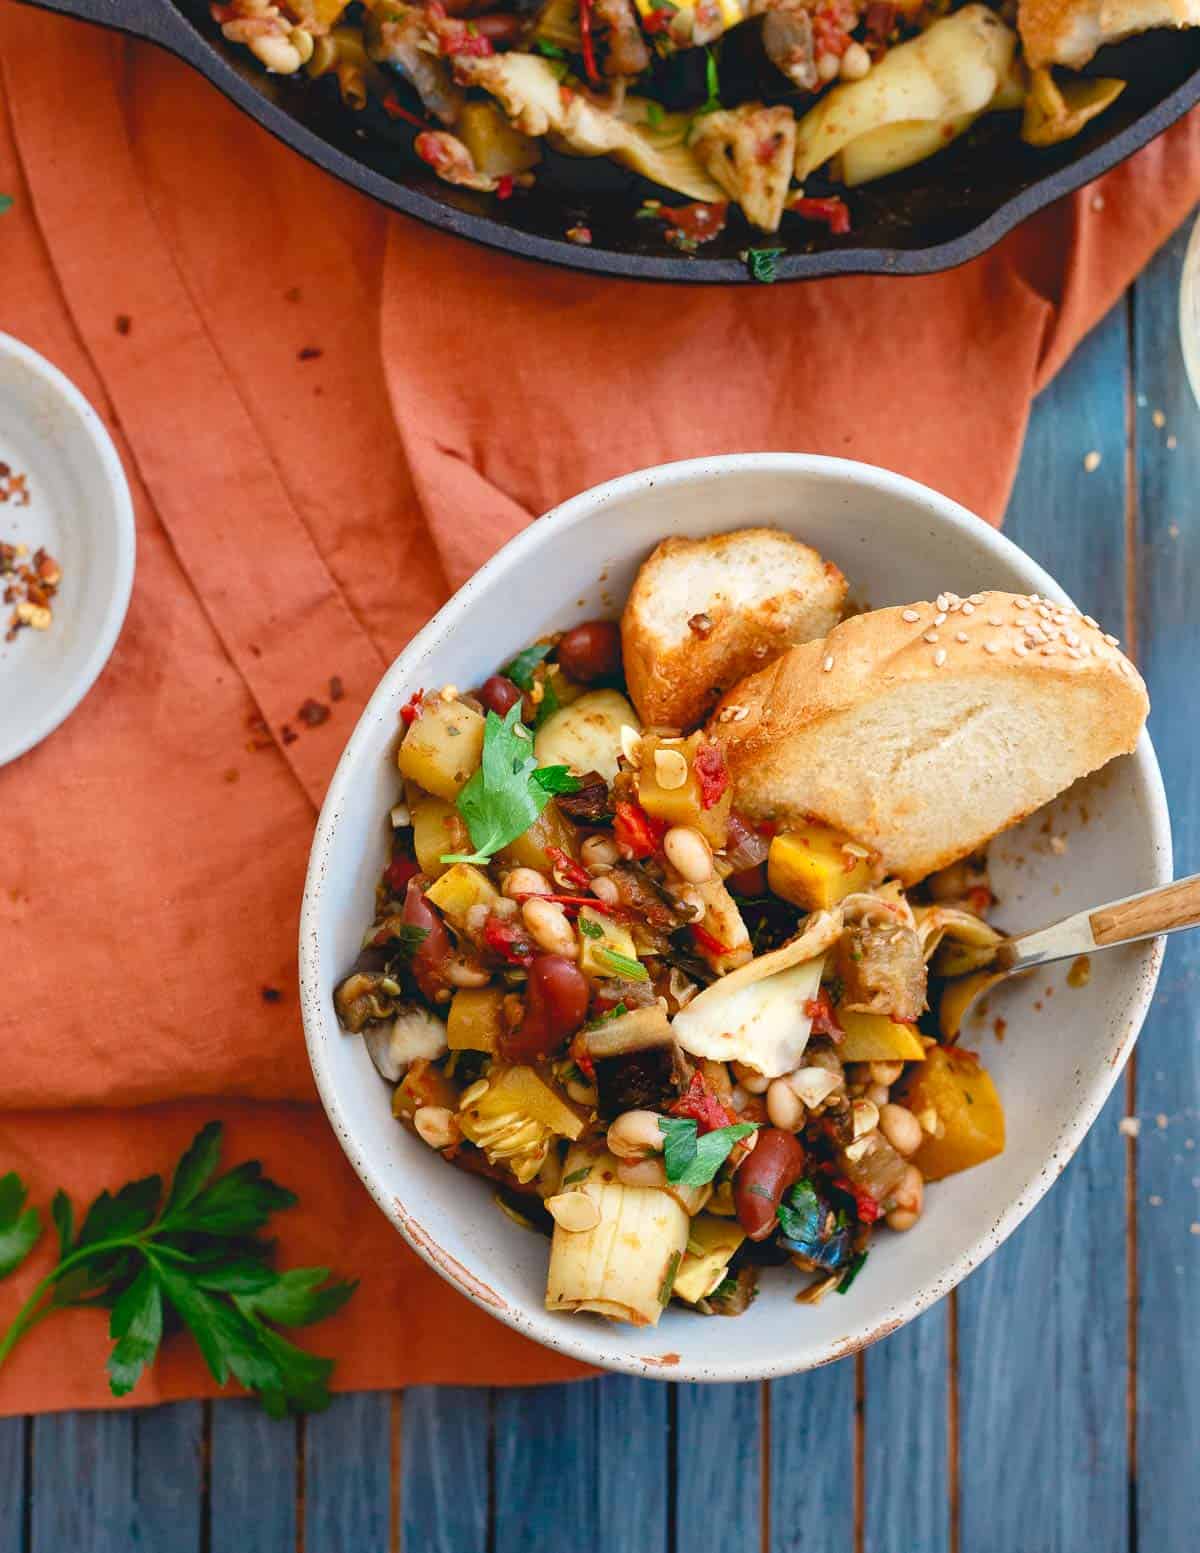 Serve this end of summer vegetable bean skillet with some crusty bread for an easy meatless meal.